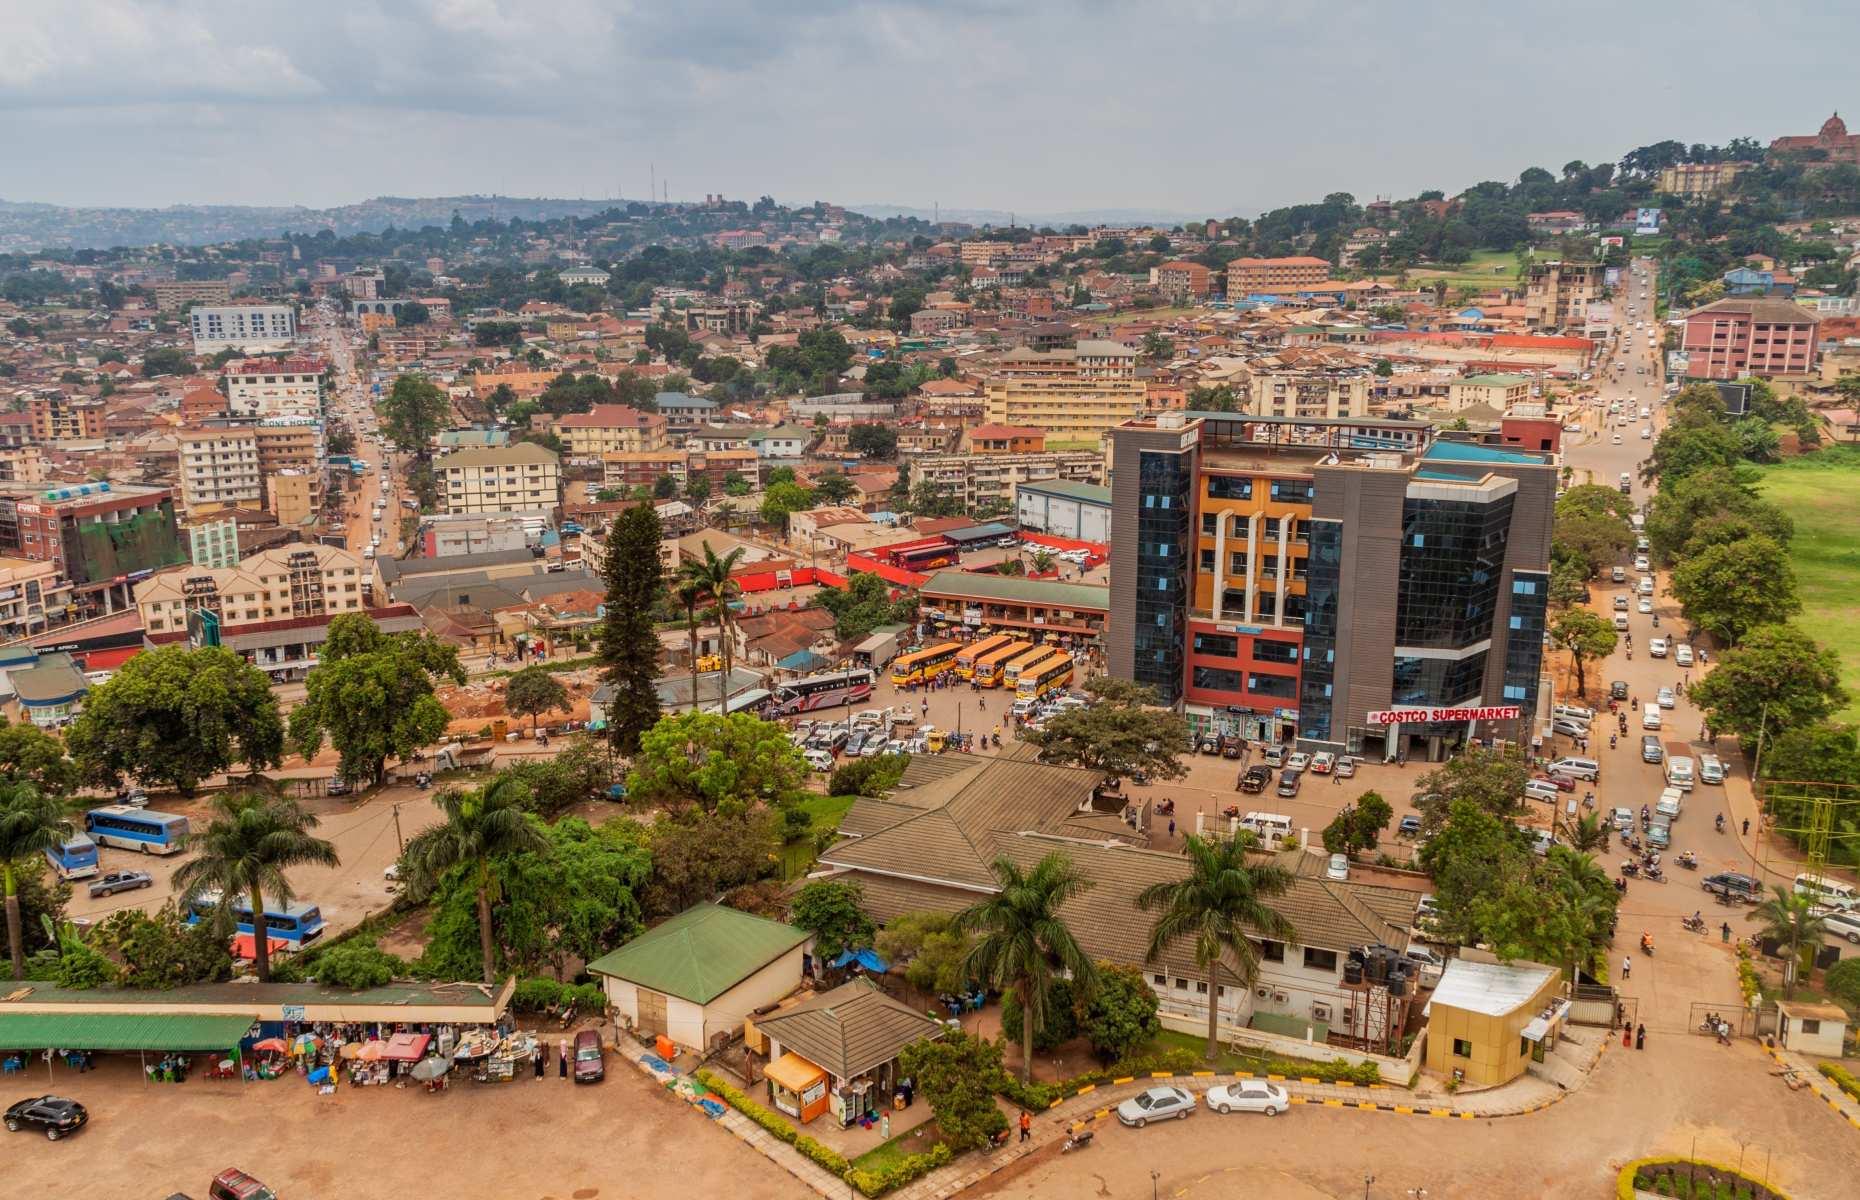 <p>Three pilot schemes have now been selected for the railway to be trialled: the first routes to open up will be Dar es Salaam in Tanzania to Kigali in Rwanda; Kampala in Uganda (pictured) to Bujumbura in Burundi; and Johannesburg in South Africa to Walvis Bay in Namibia, via Botswana's capital Gaborone. While the project has already seen significant delays and other practical challenges, the Uganda leg of the new Standard Gauge Railway is set to enter construction later in 2023.</p>  <p><a href="https://www.loveexploring.com/gallerylist/131832/the-worlds-best-overnight-trains"><strong>Now read on for the world's best overnight trains</strong></a></p>